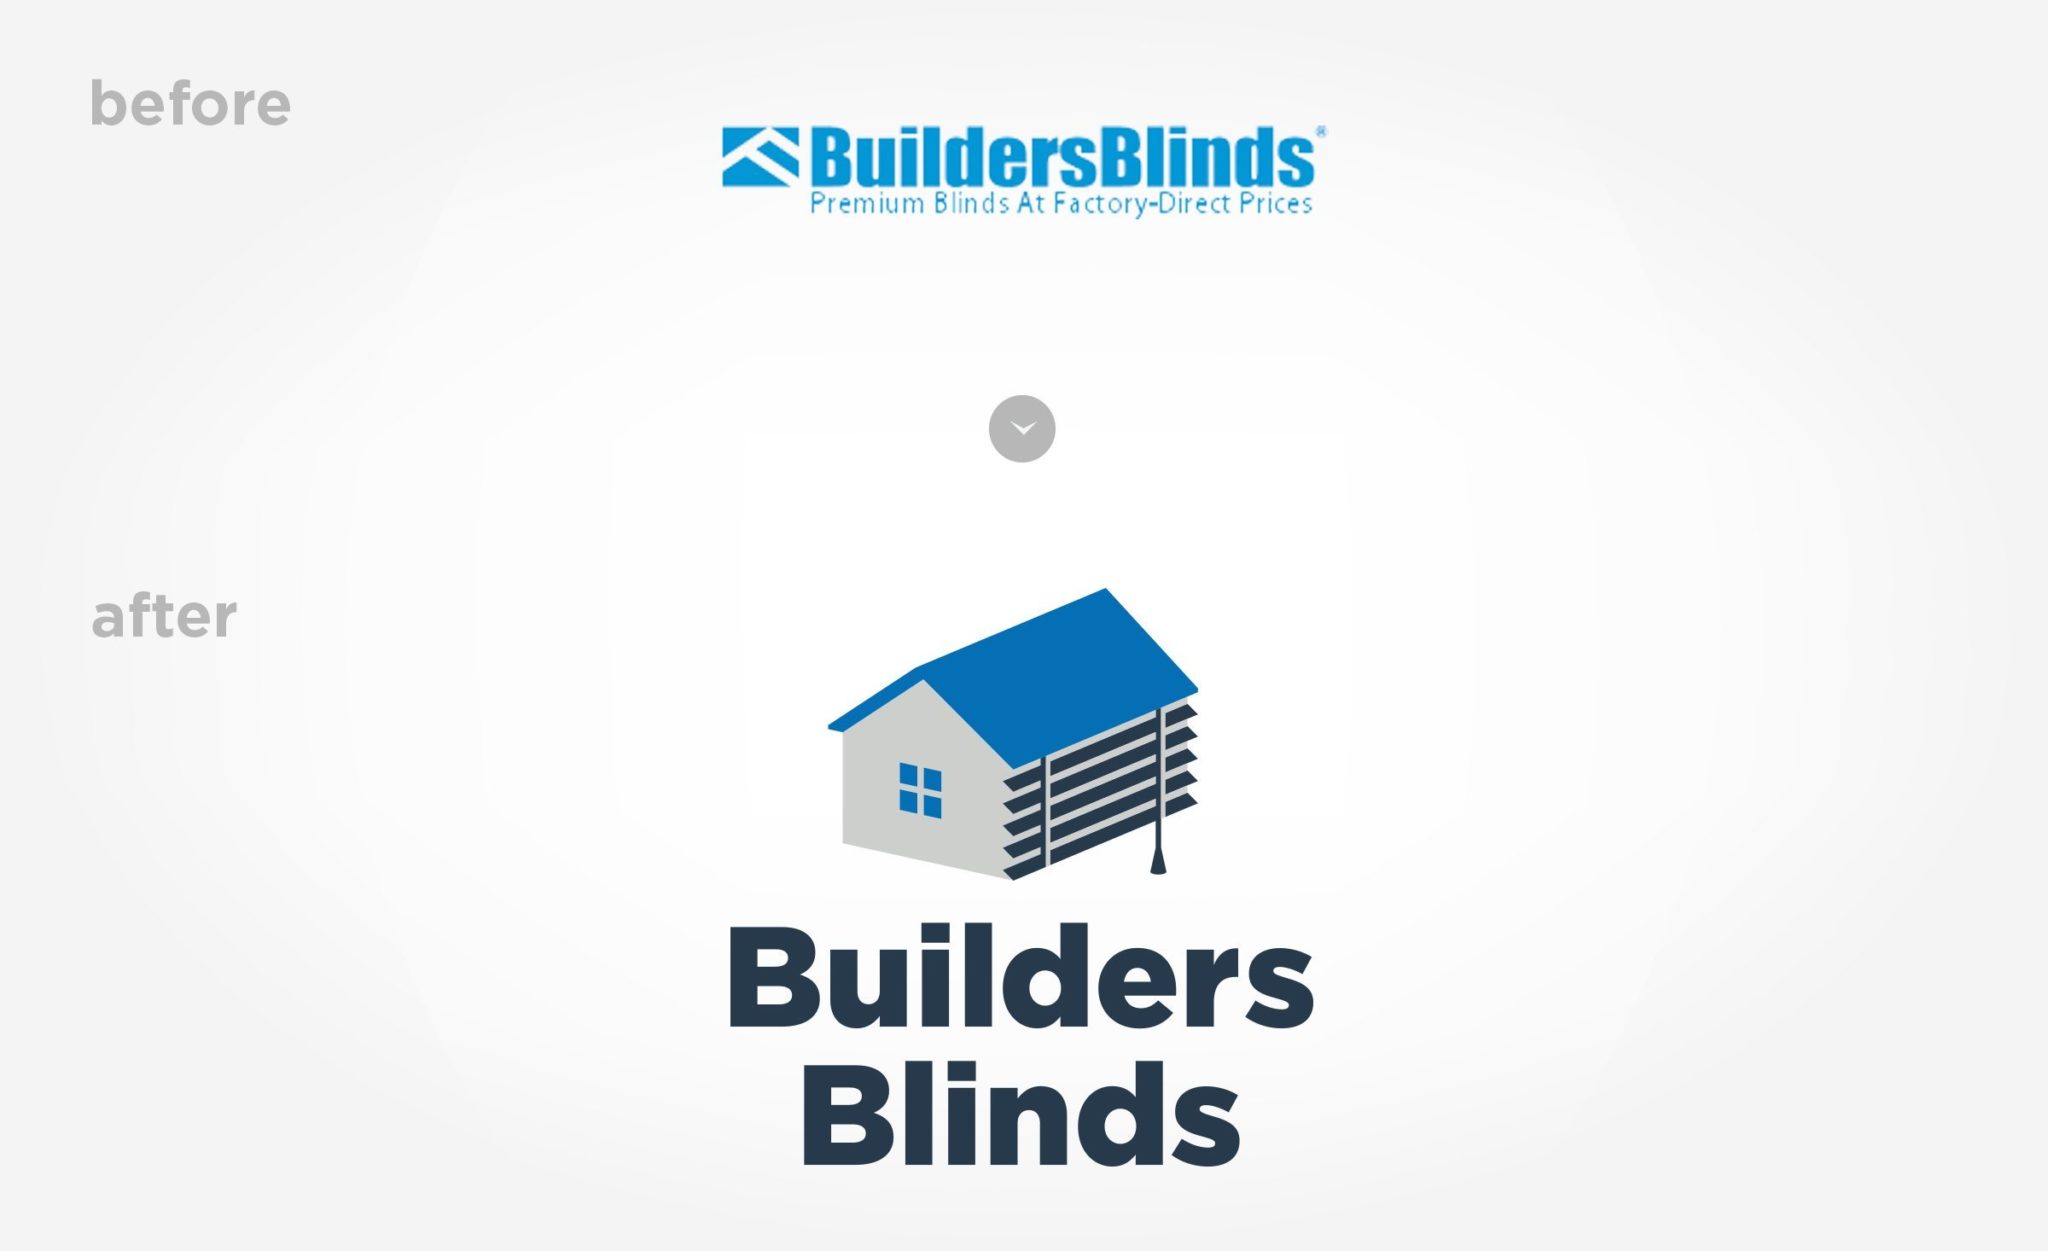 Builders Blinds logo before & after.